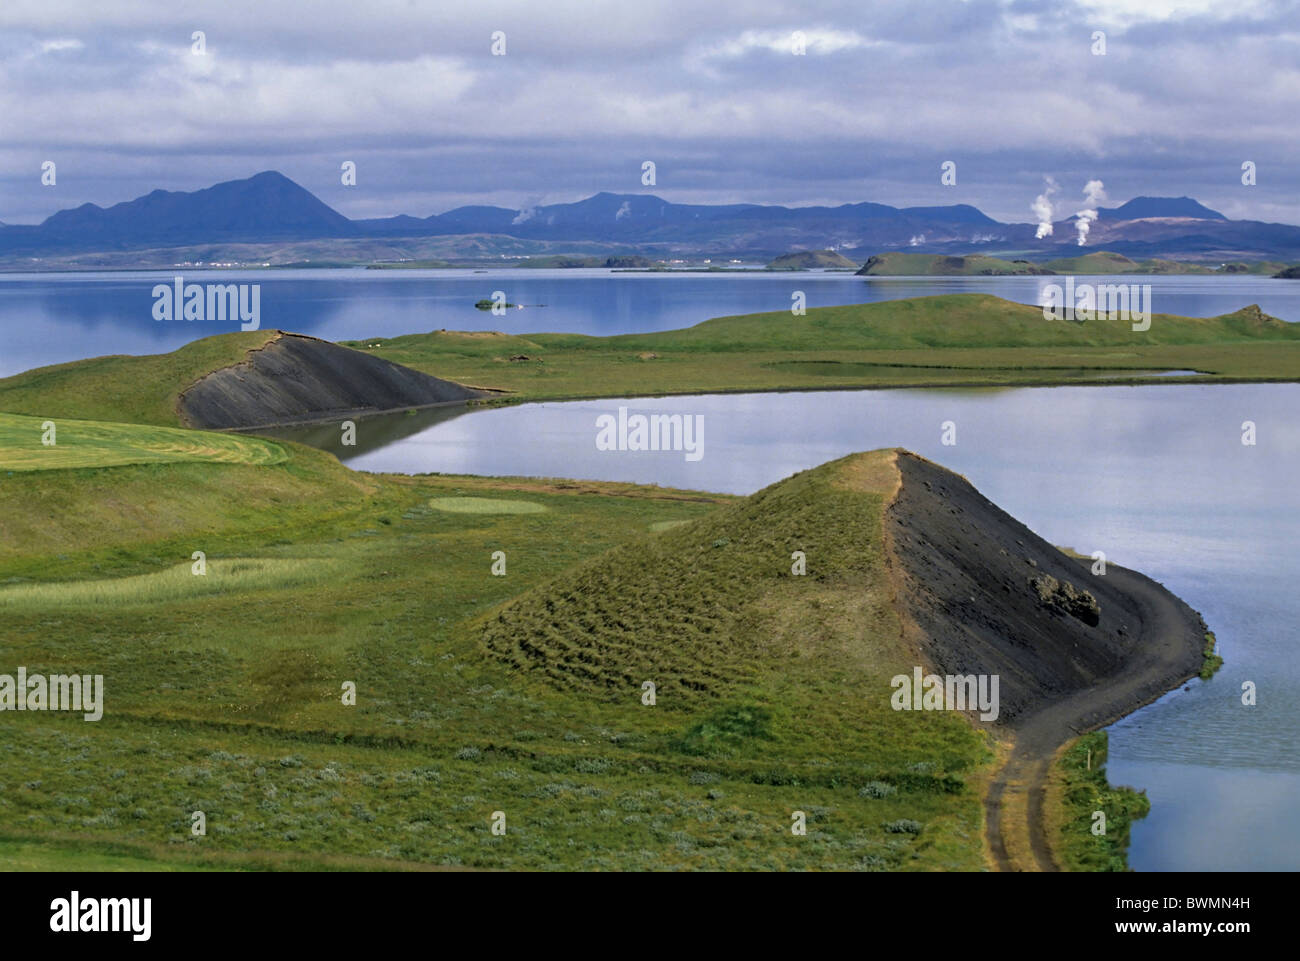 Iceland landscape - Myvatn, a shallow eutrophic lake situated in an area of active volcanoes, Iceland. Stock Photo